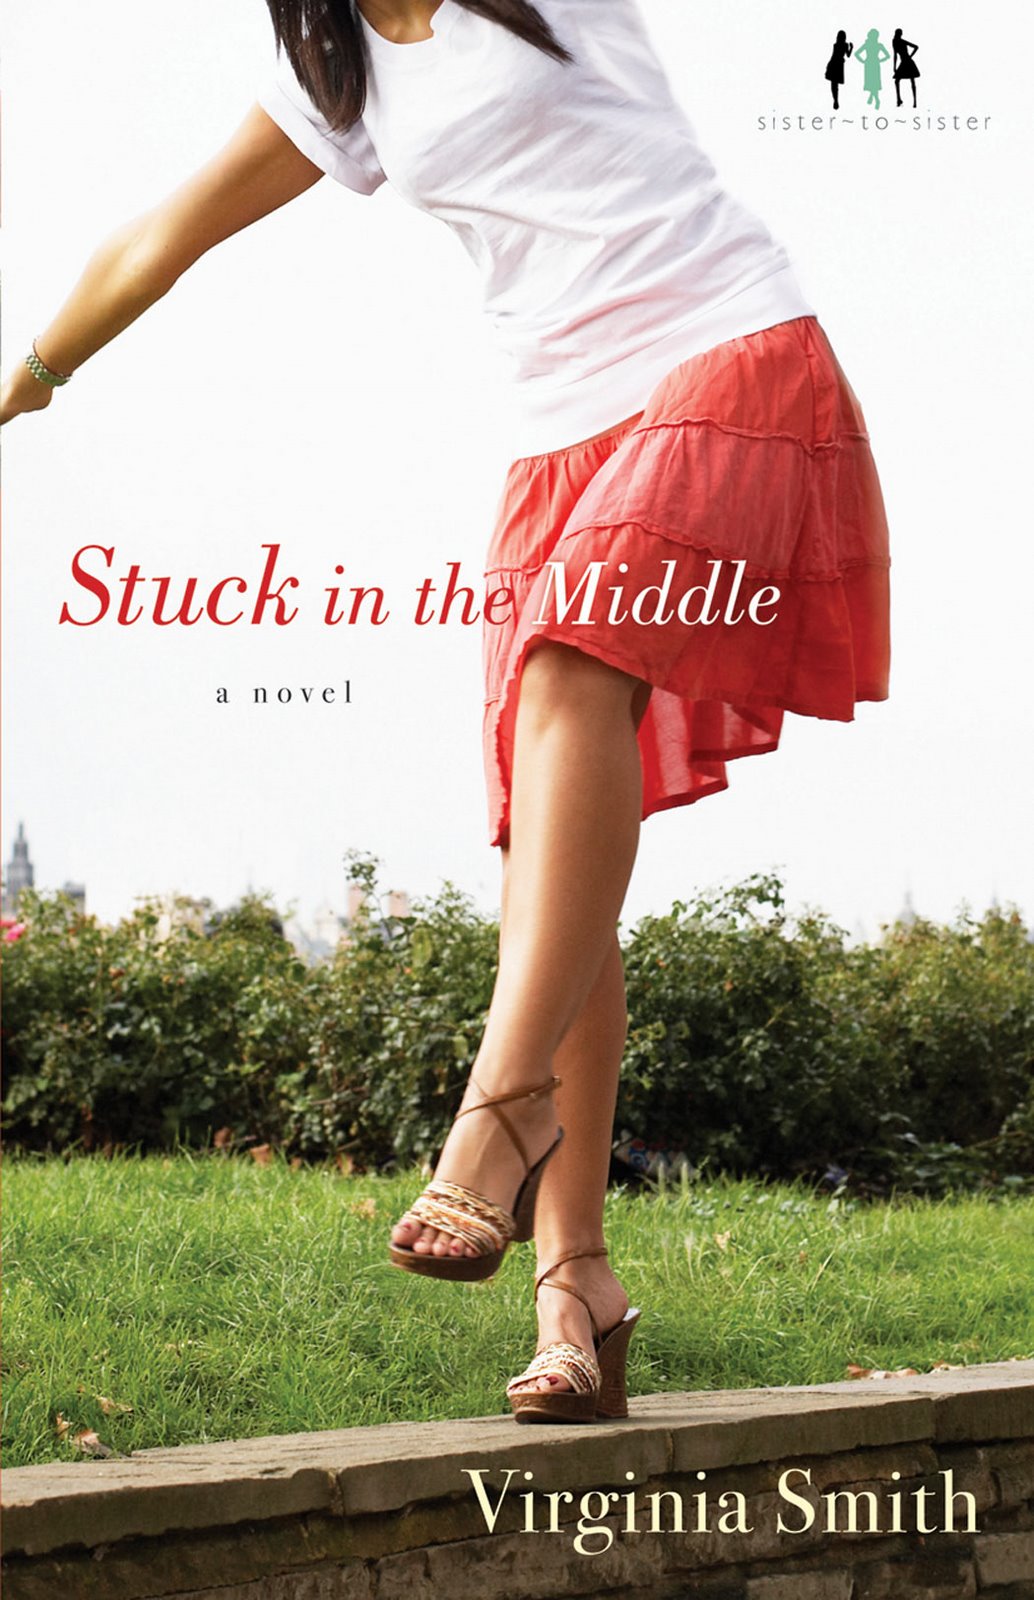 [Stuck+in+the+Middle+book+cover+image.jpg]